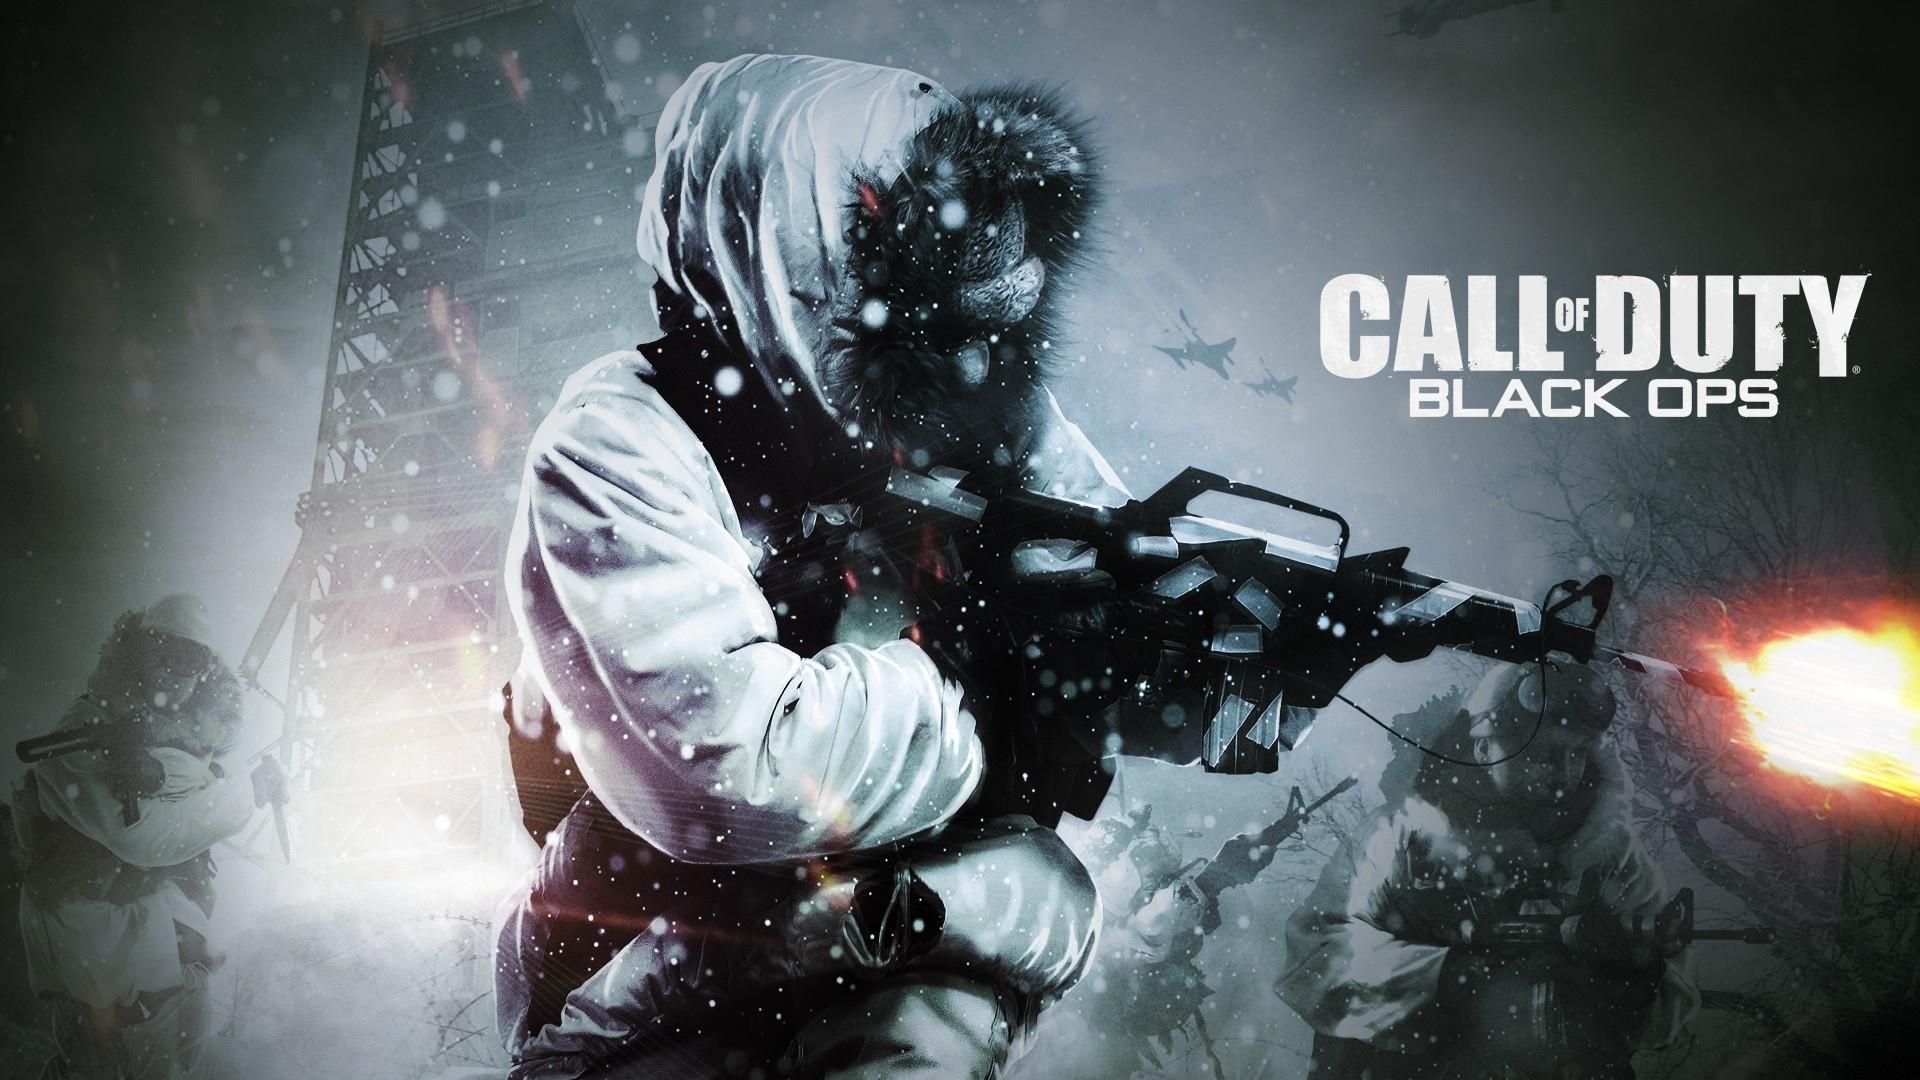 Download wallpaper 1920x1080 call of duty black ops, soldier